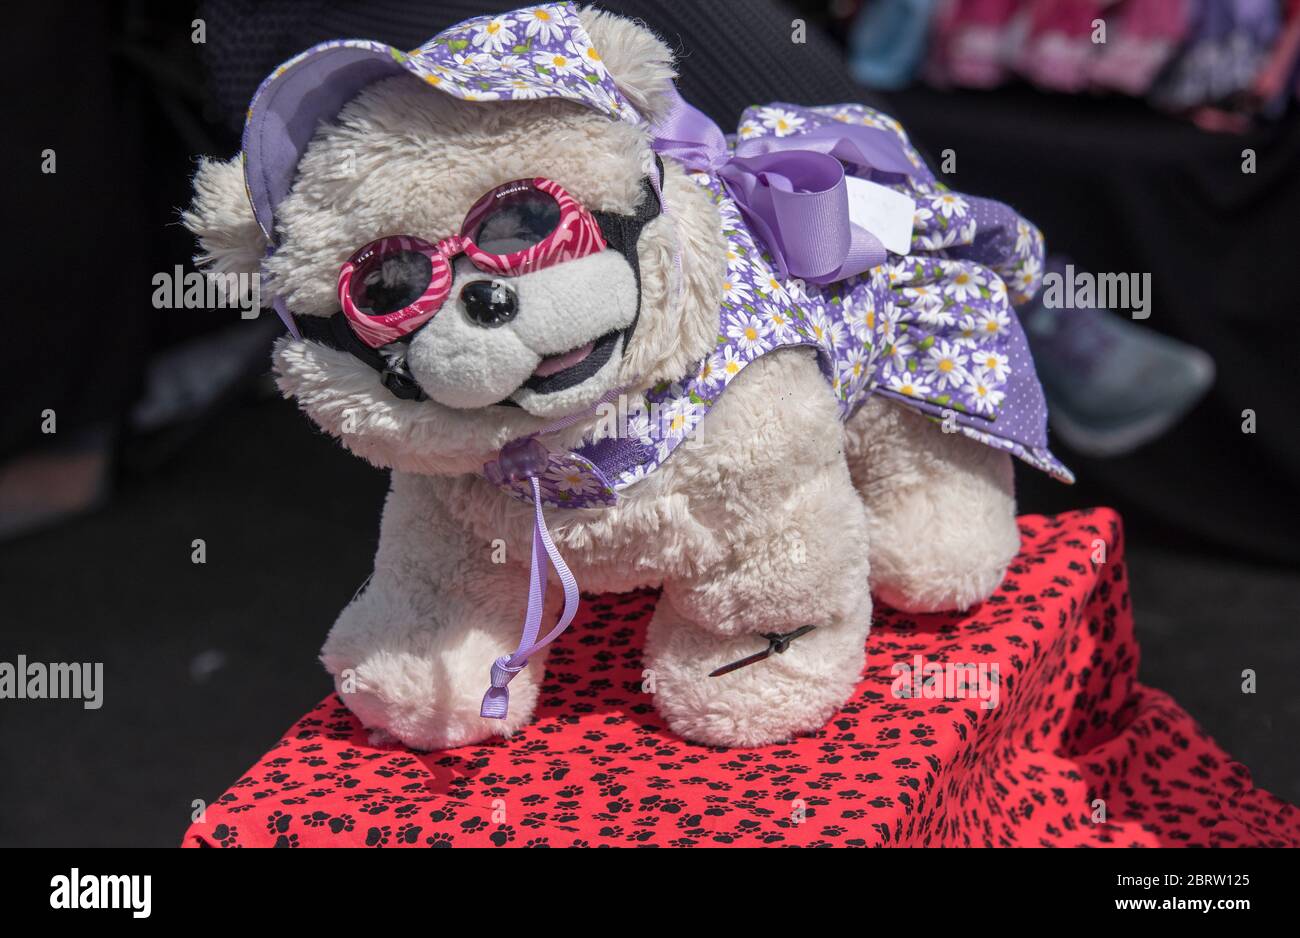 Cute toy dog for sale in market at Lake Eola Park Orlando Florida. Stock Photo